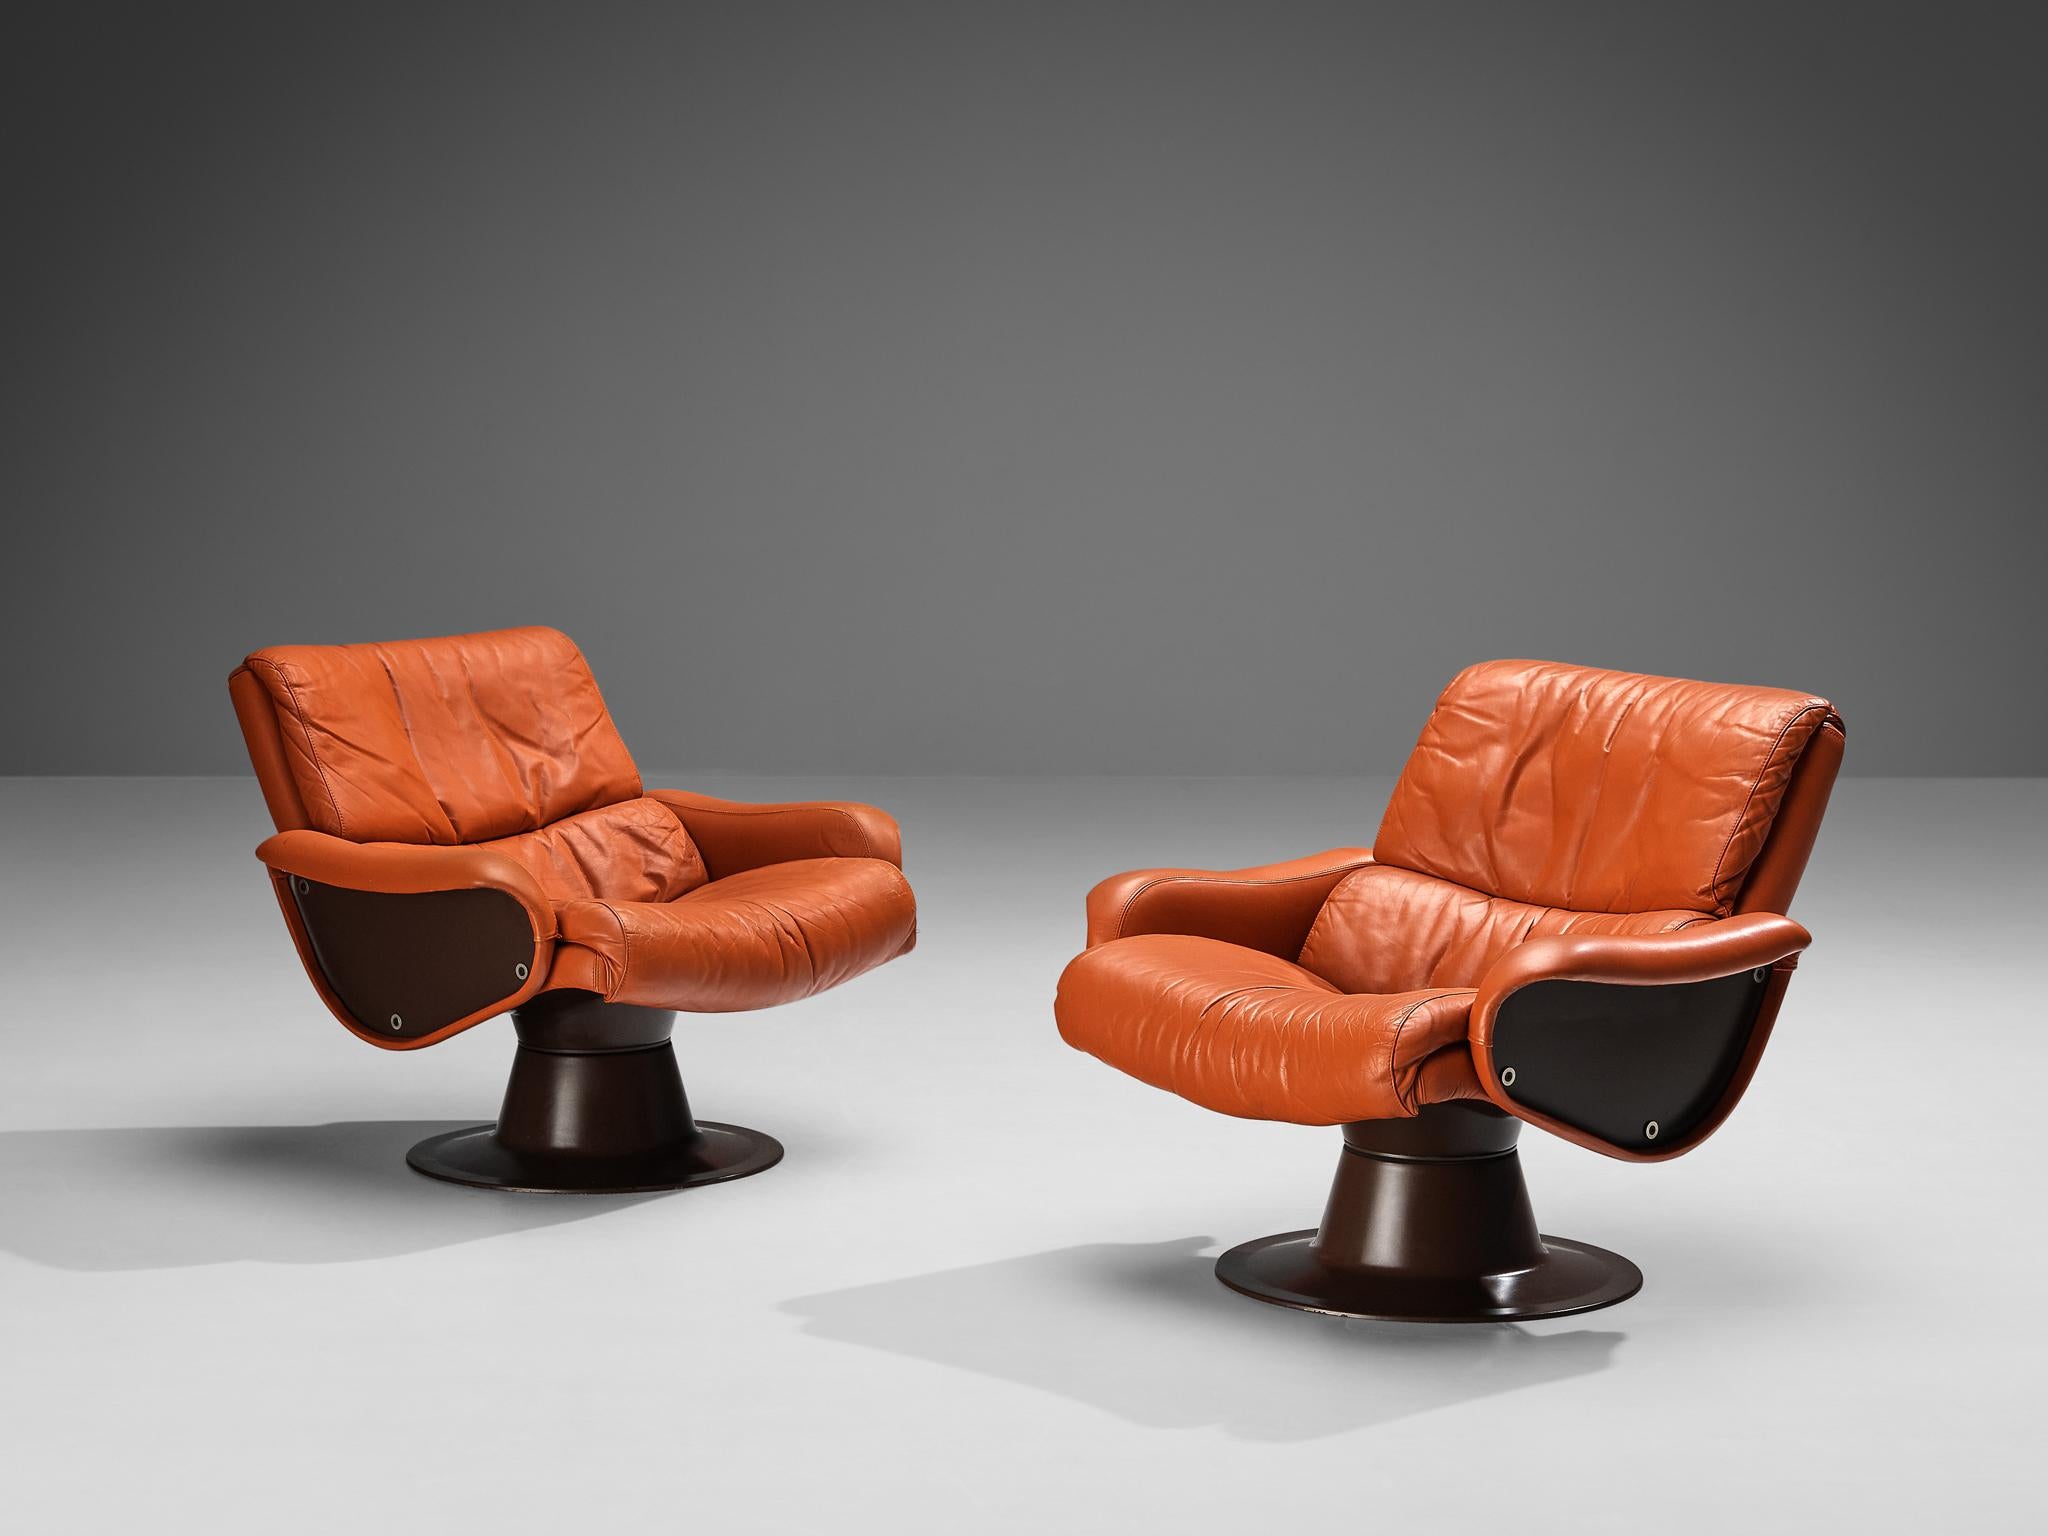 Yrjö Kukkapuro for Haimi, pair of 'Saturnus' lounge chair, leather, fiberglass, Finland, 1960s

Stunning easy chairs in cognac brown leather and fiberglass by Finnish designer Yrjö Kukkapuro. This organic shaped chair is made in a moulded fiberglass